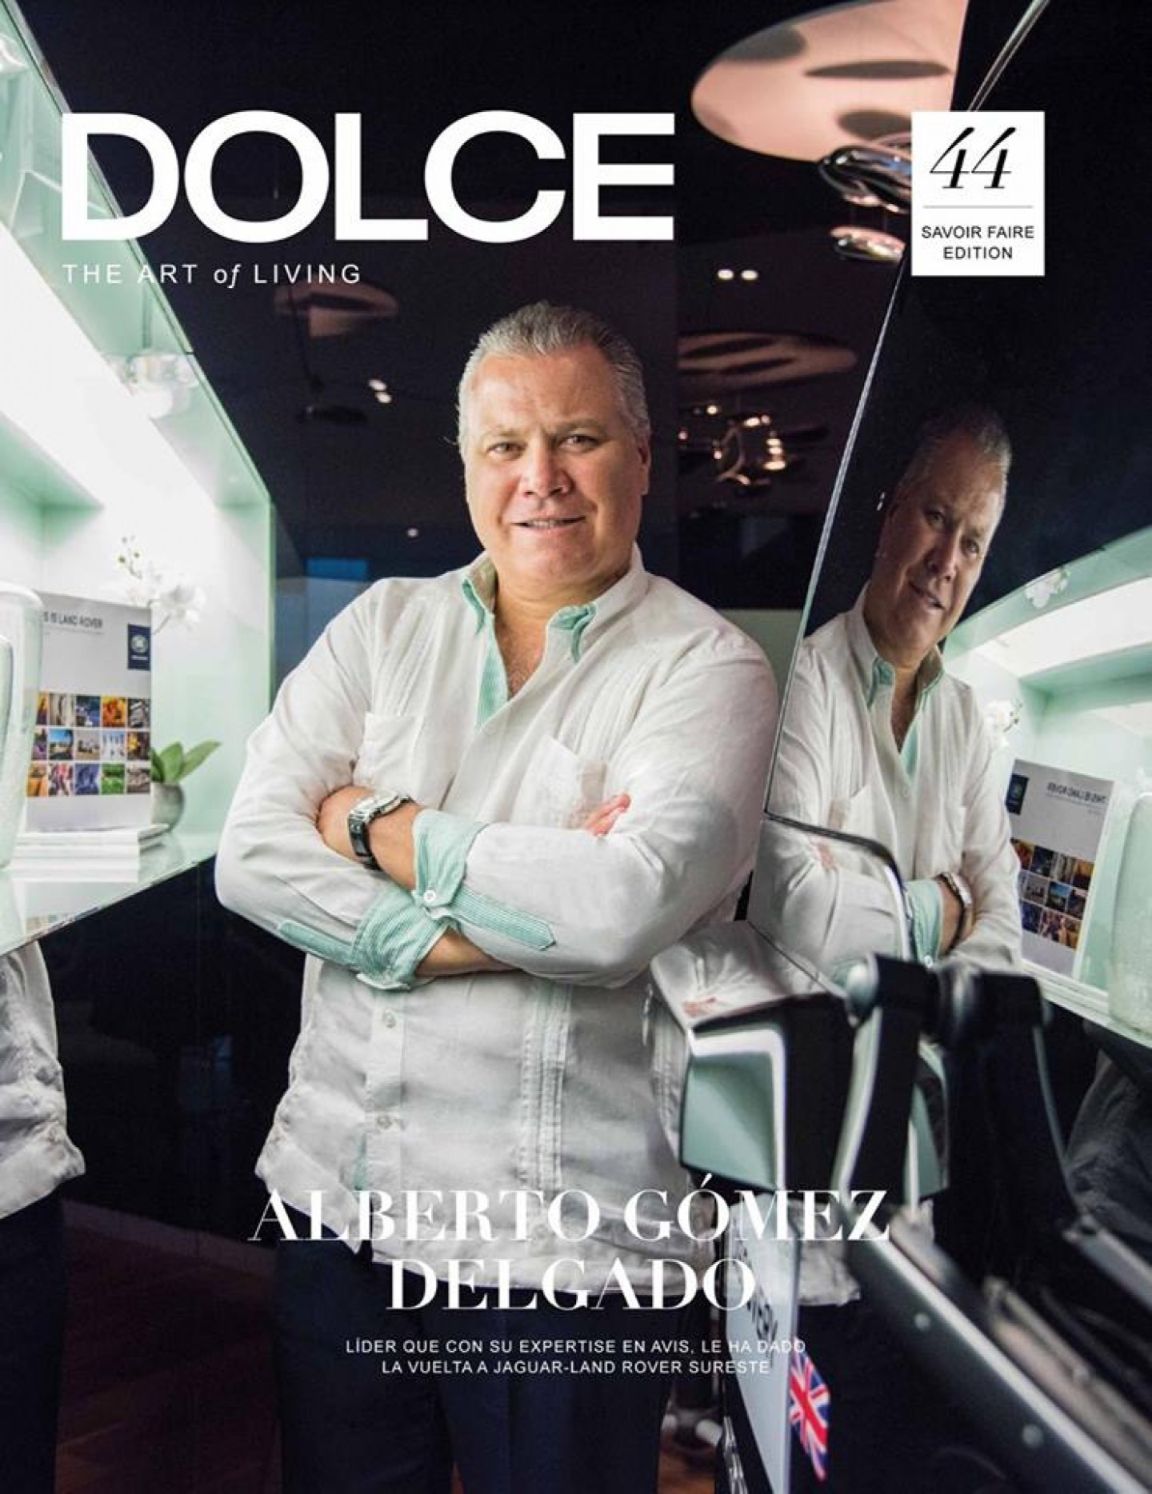 dolce 44